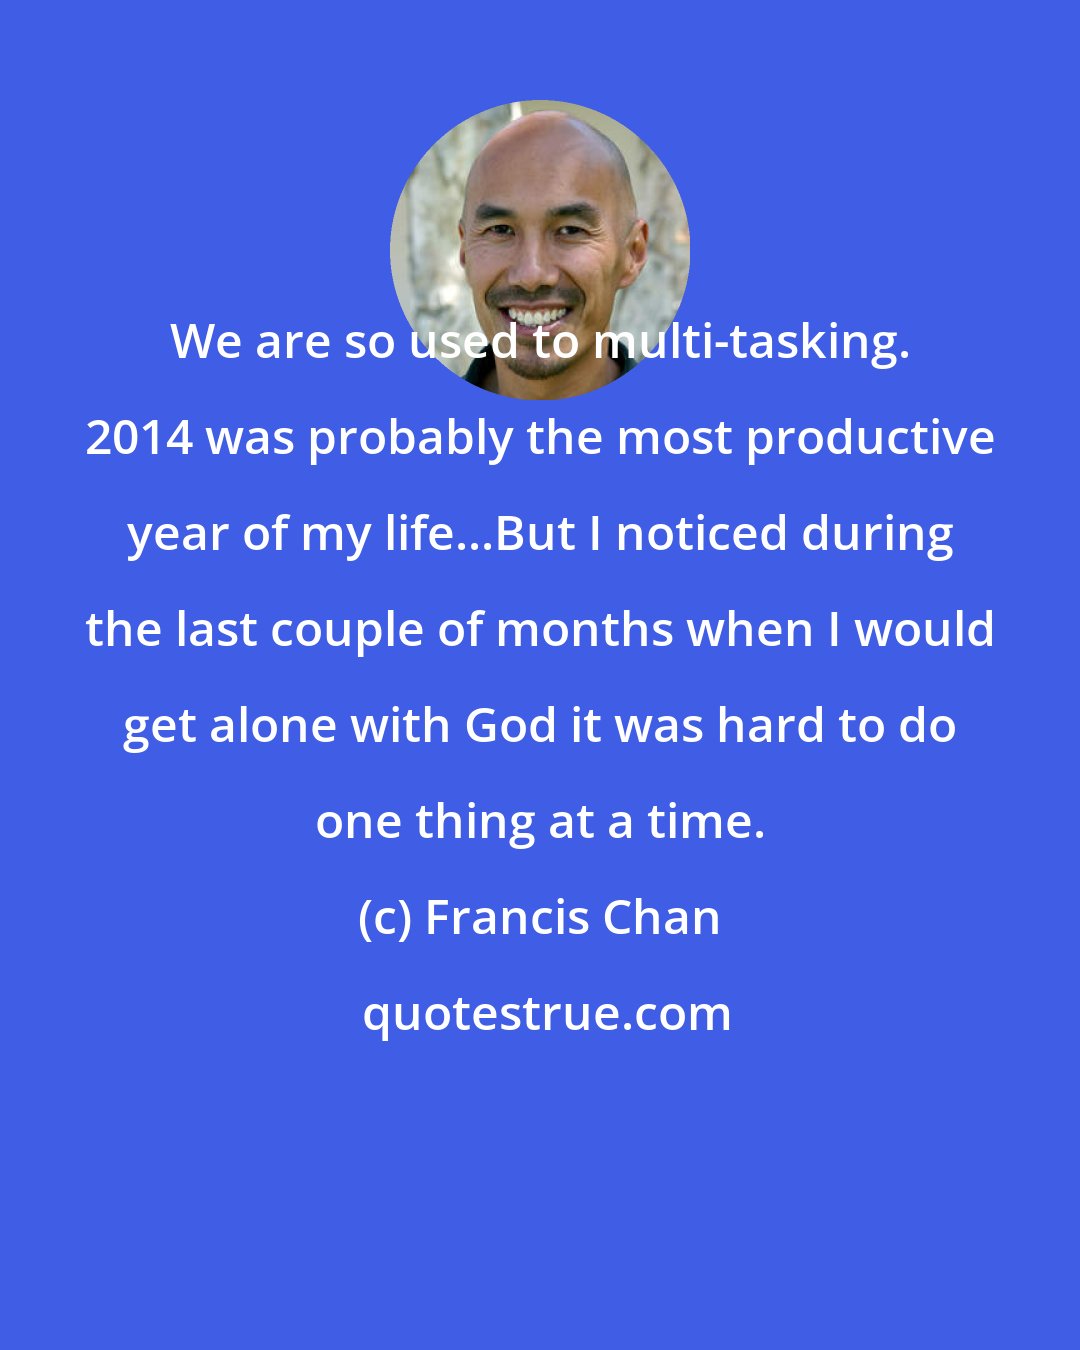 Francis Chan: We are so used to multi-tasking. 2014 was probably the most productive year of my life...But I noticed during the last couple of months when I would get alone with God it was hard to do one thing at a time.